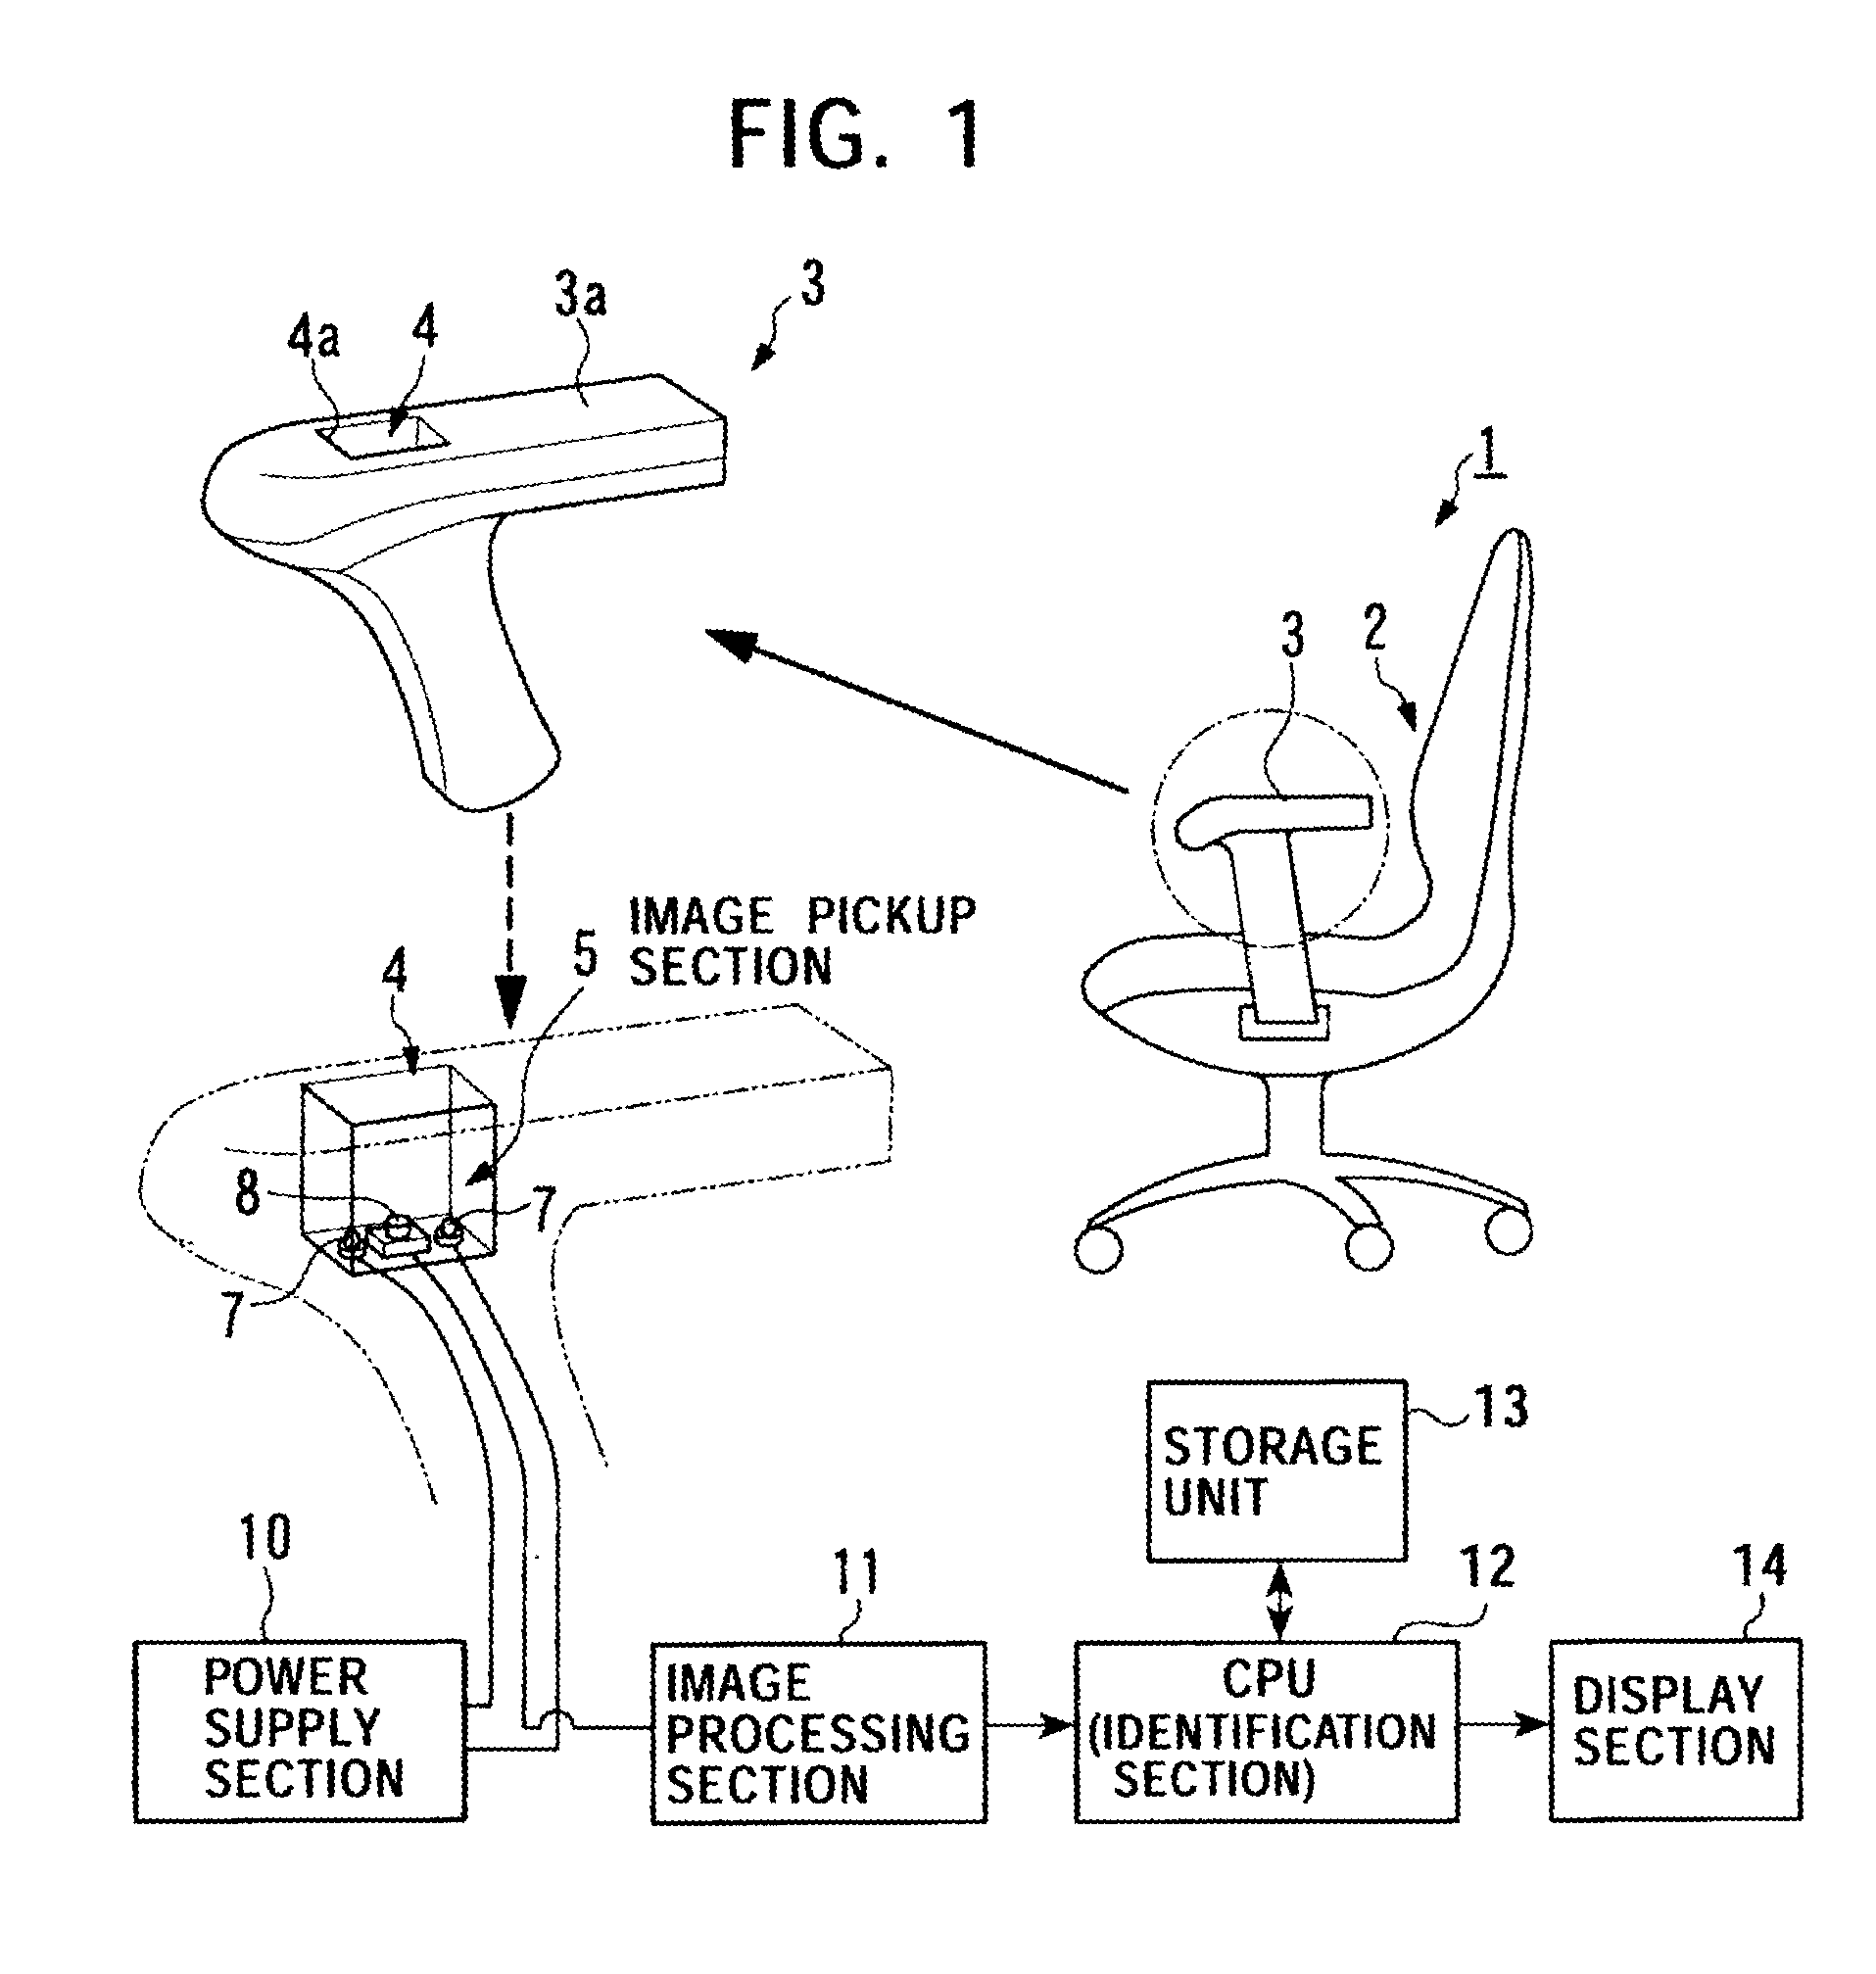 Apparatus, method, and program for personal identification